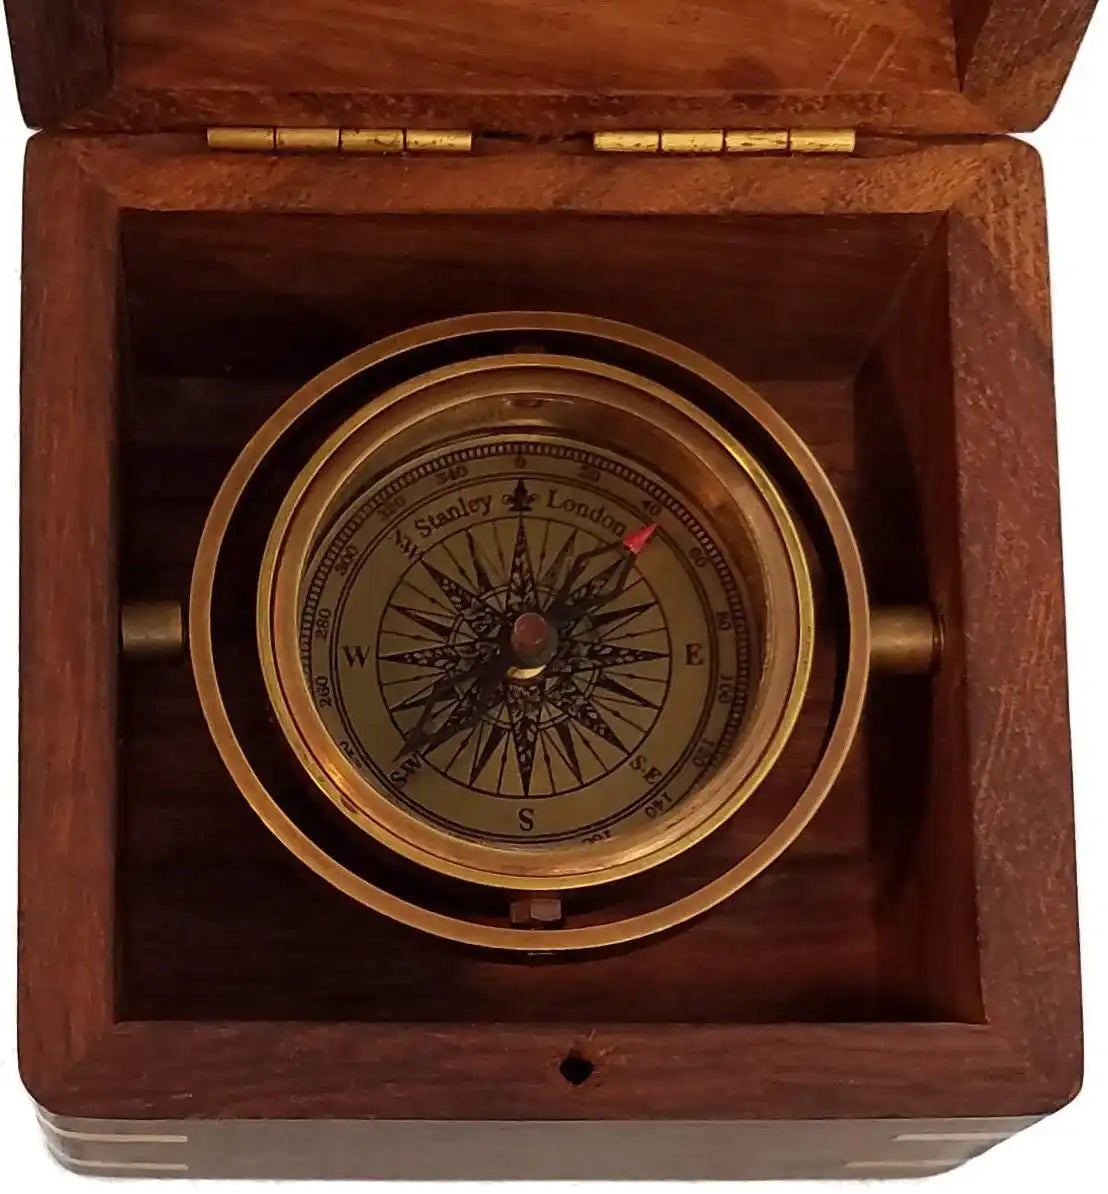 Customizable Personalized Desk Compass Gift  Engravable Miniature Boxed Compass  Great Graduation Gift, Employee Recognition Award, Corporate Gift